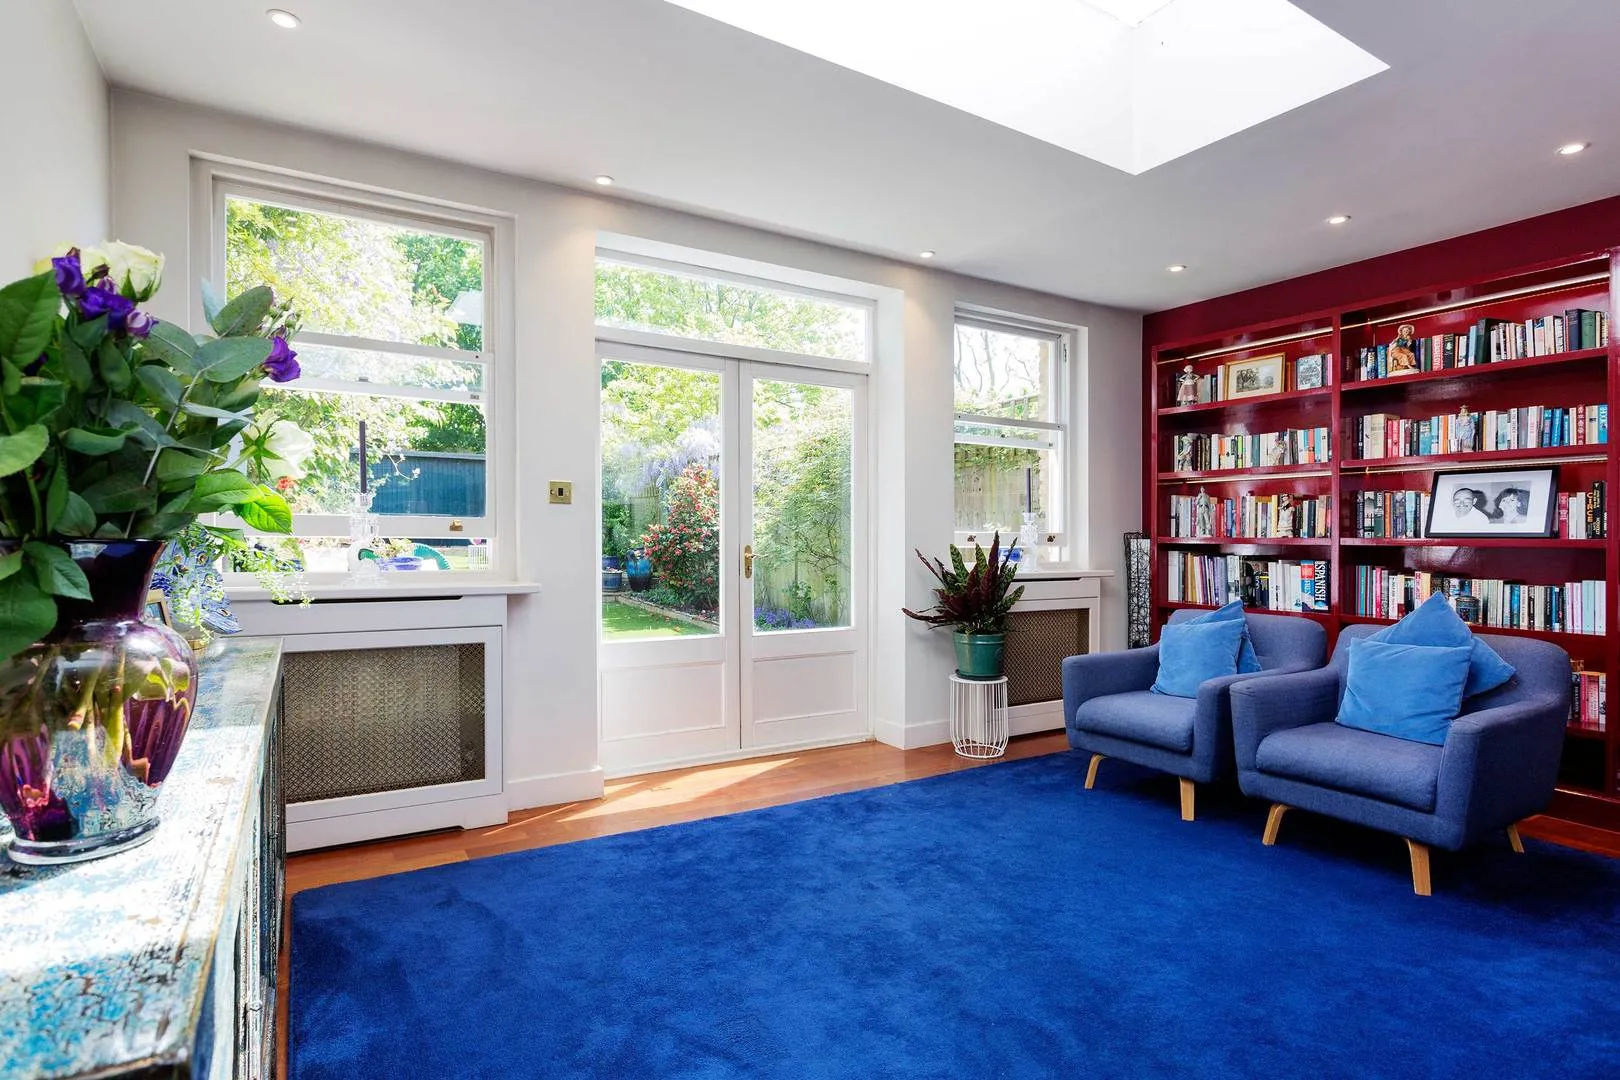 Earlsfield Road, holiday home in Wandsworth, London